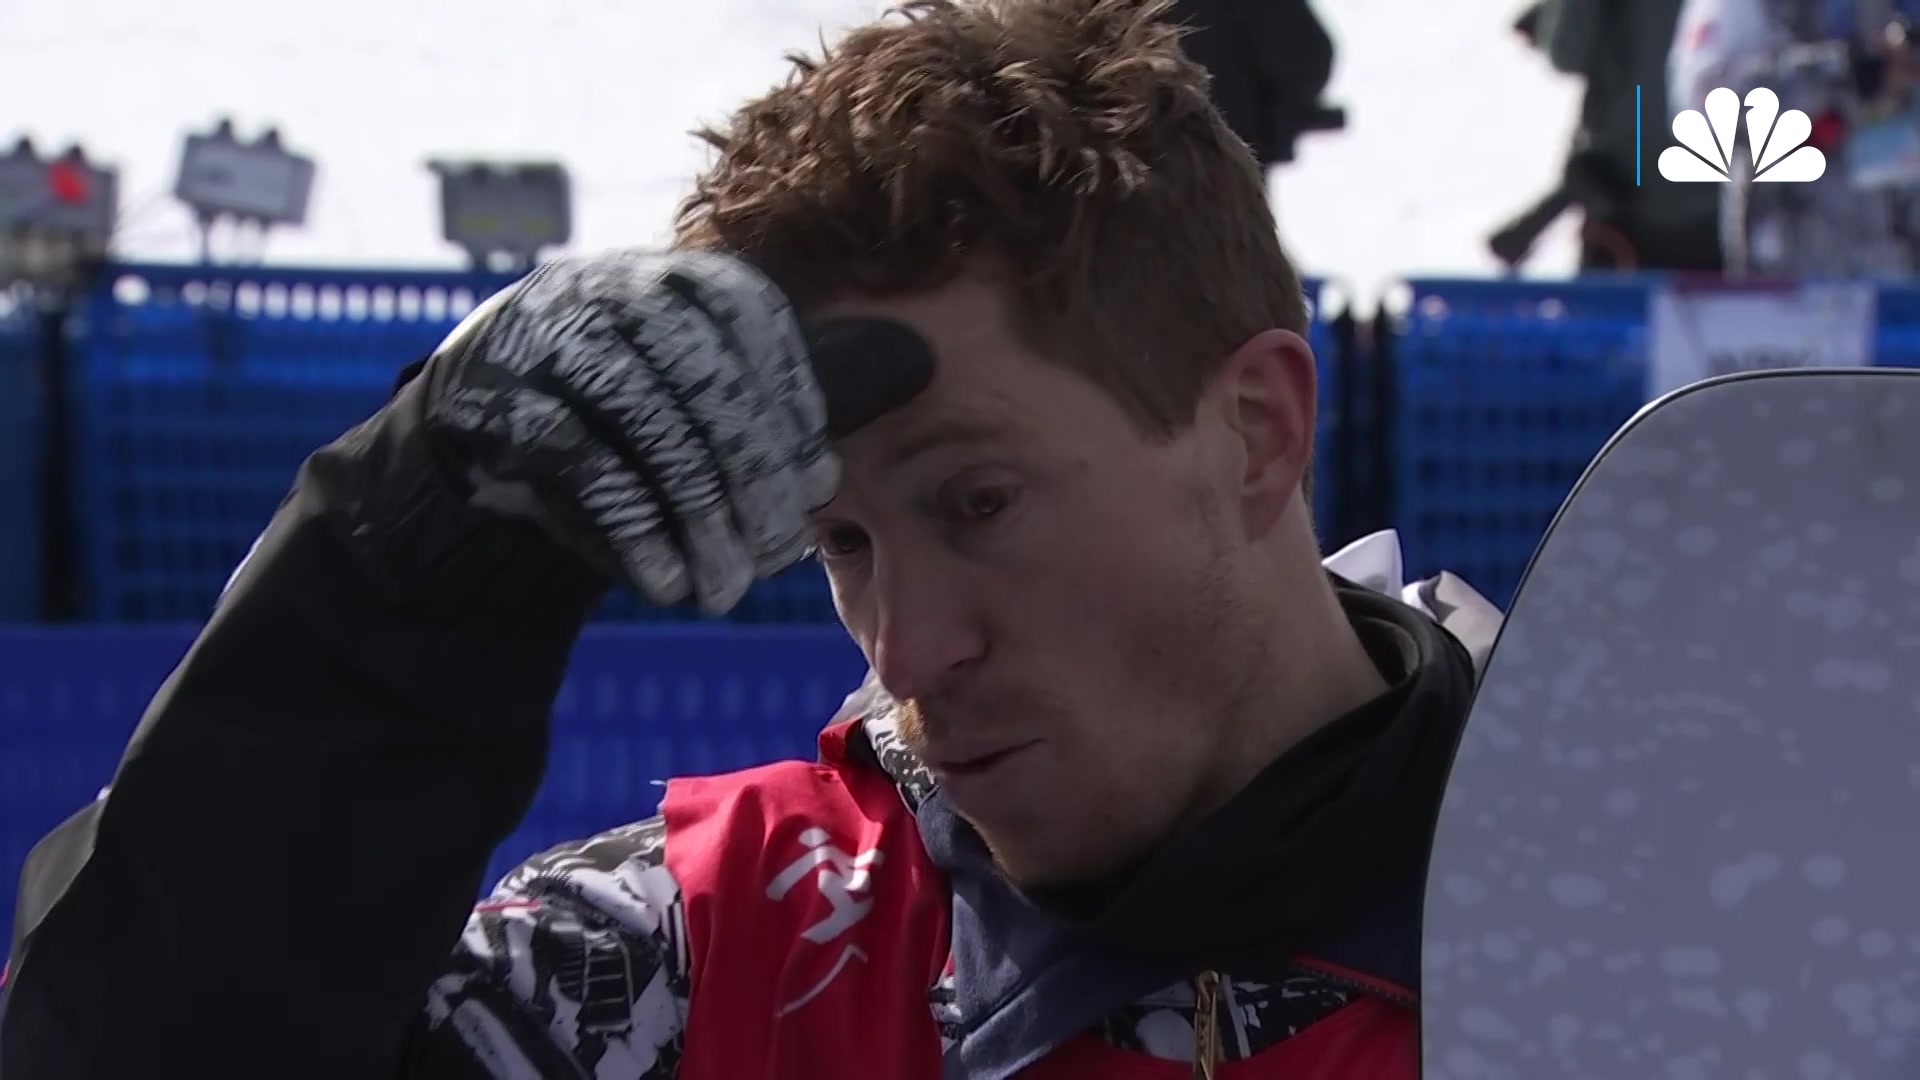 April 2023: Shaun White Reveals There is “No Pressure” to Propose